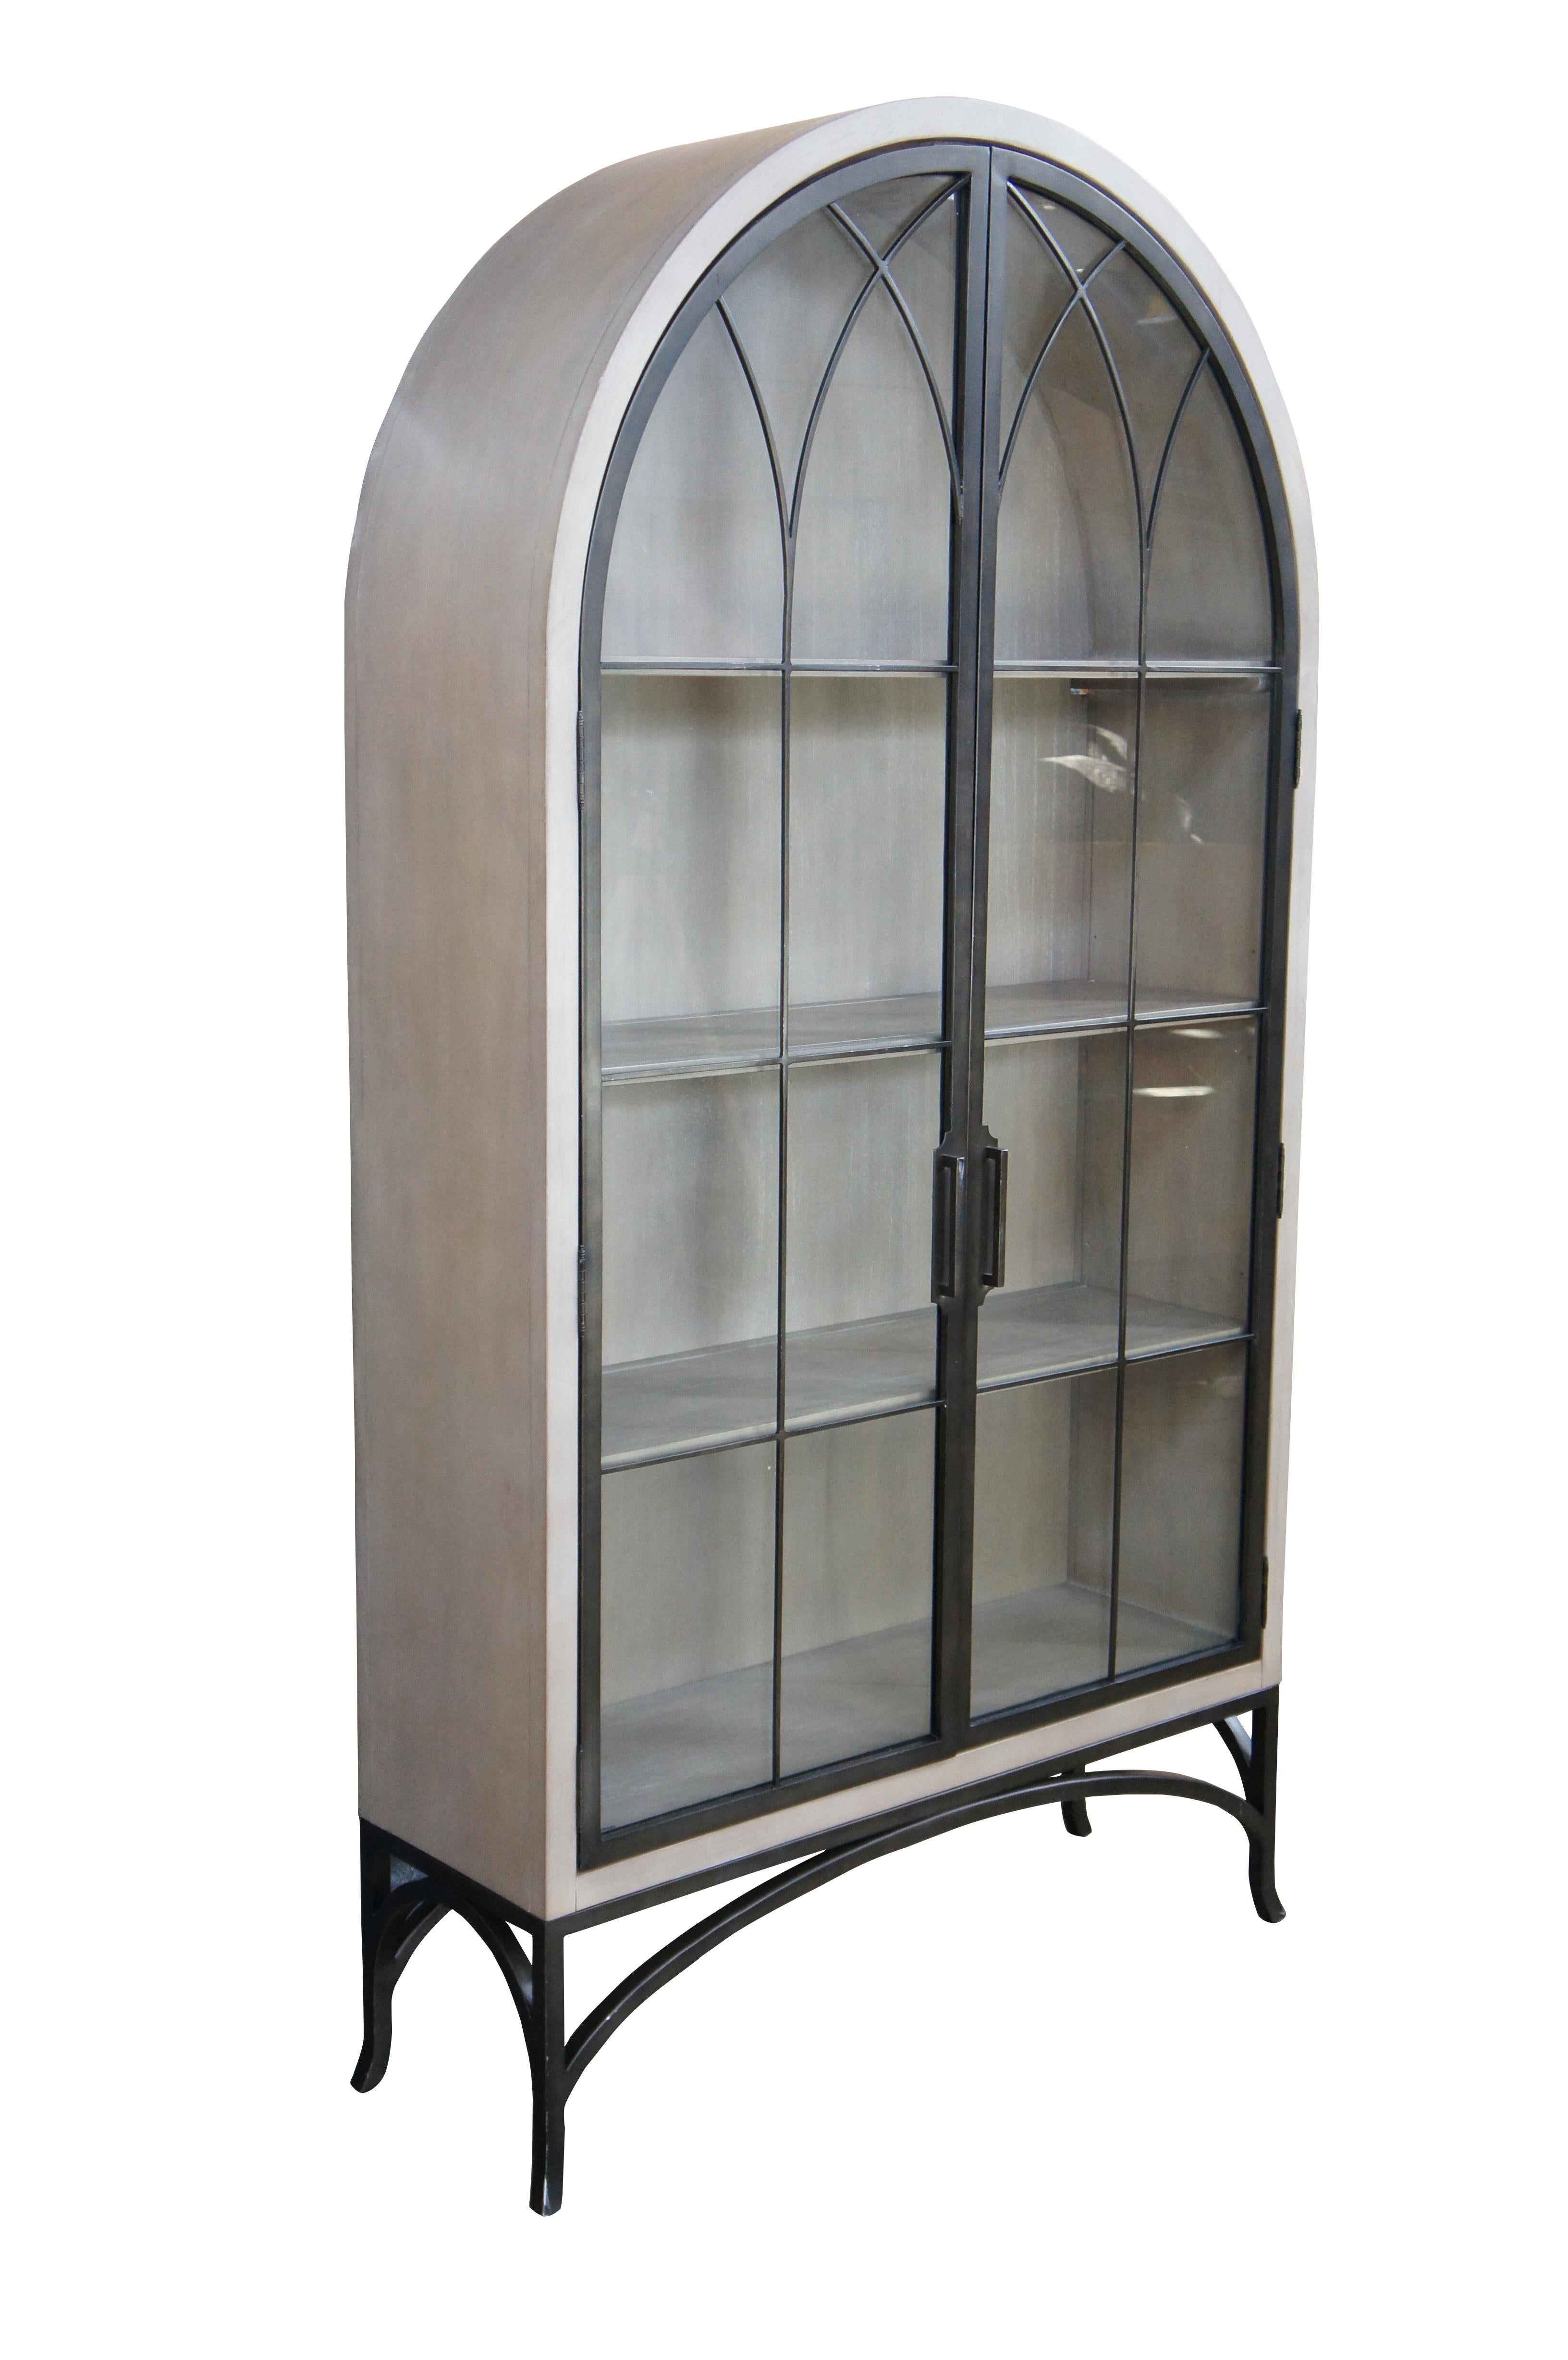 The Aris Glass Door Cabinet was inspired by a graceful European Gothic window. The cabinet features a white washed finish with custom-welded, bronze metal frame doors and matching splayed feet. Slender silhouette and shallow 14